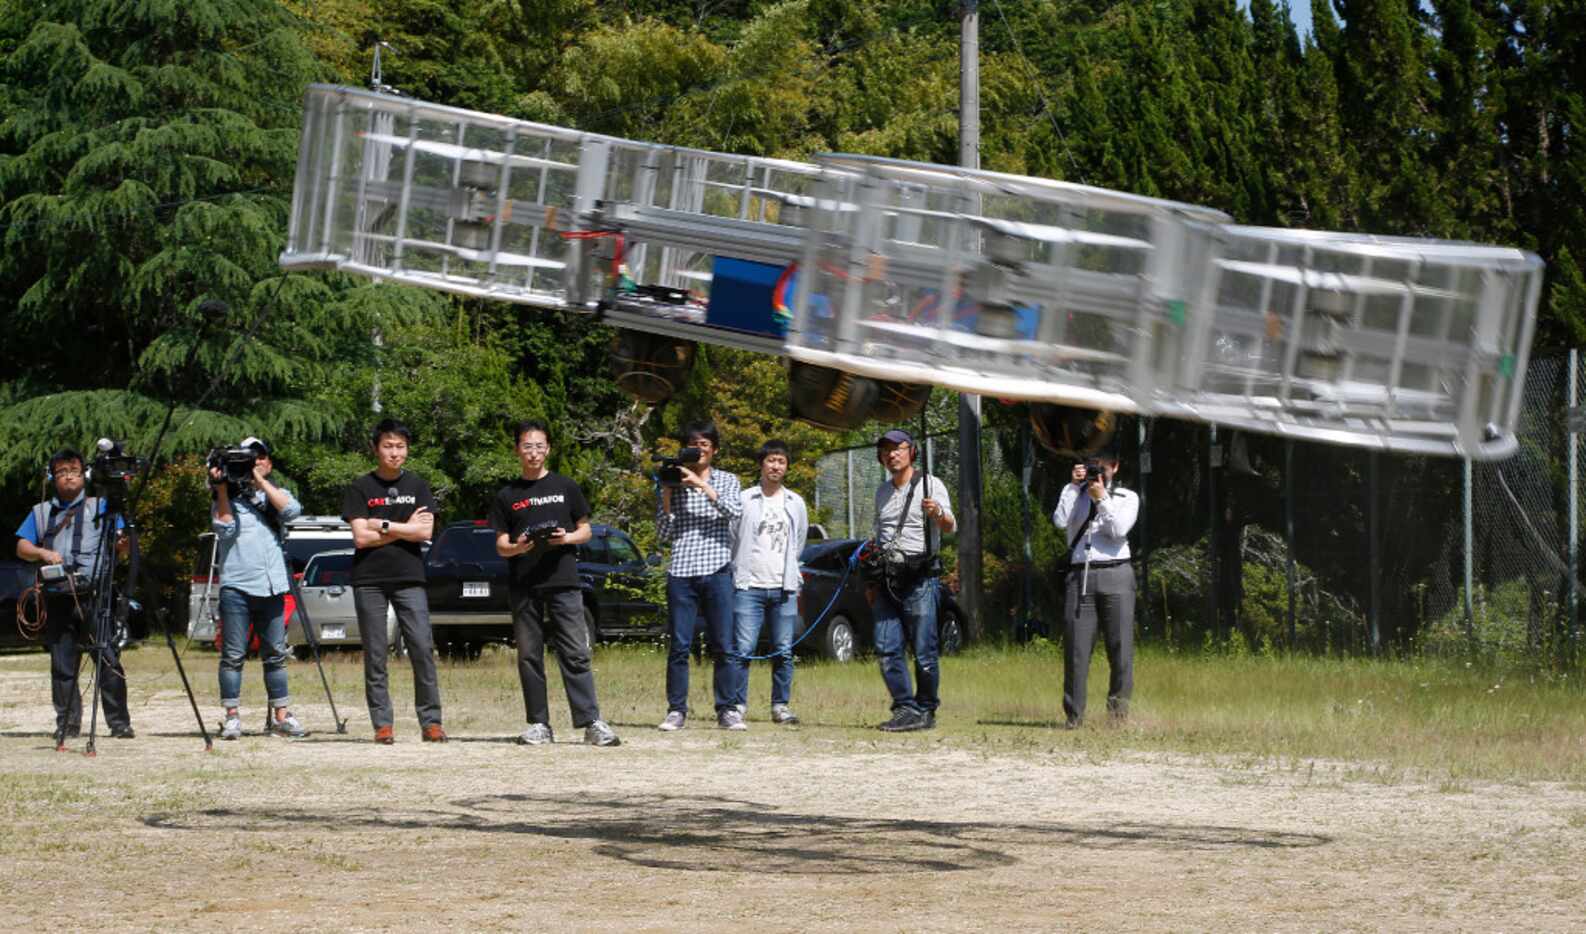 Tsubasa Nakamura, project leader of Cartivator, third from left, watches the flight of the...